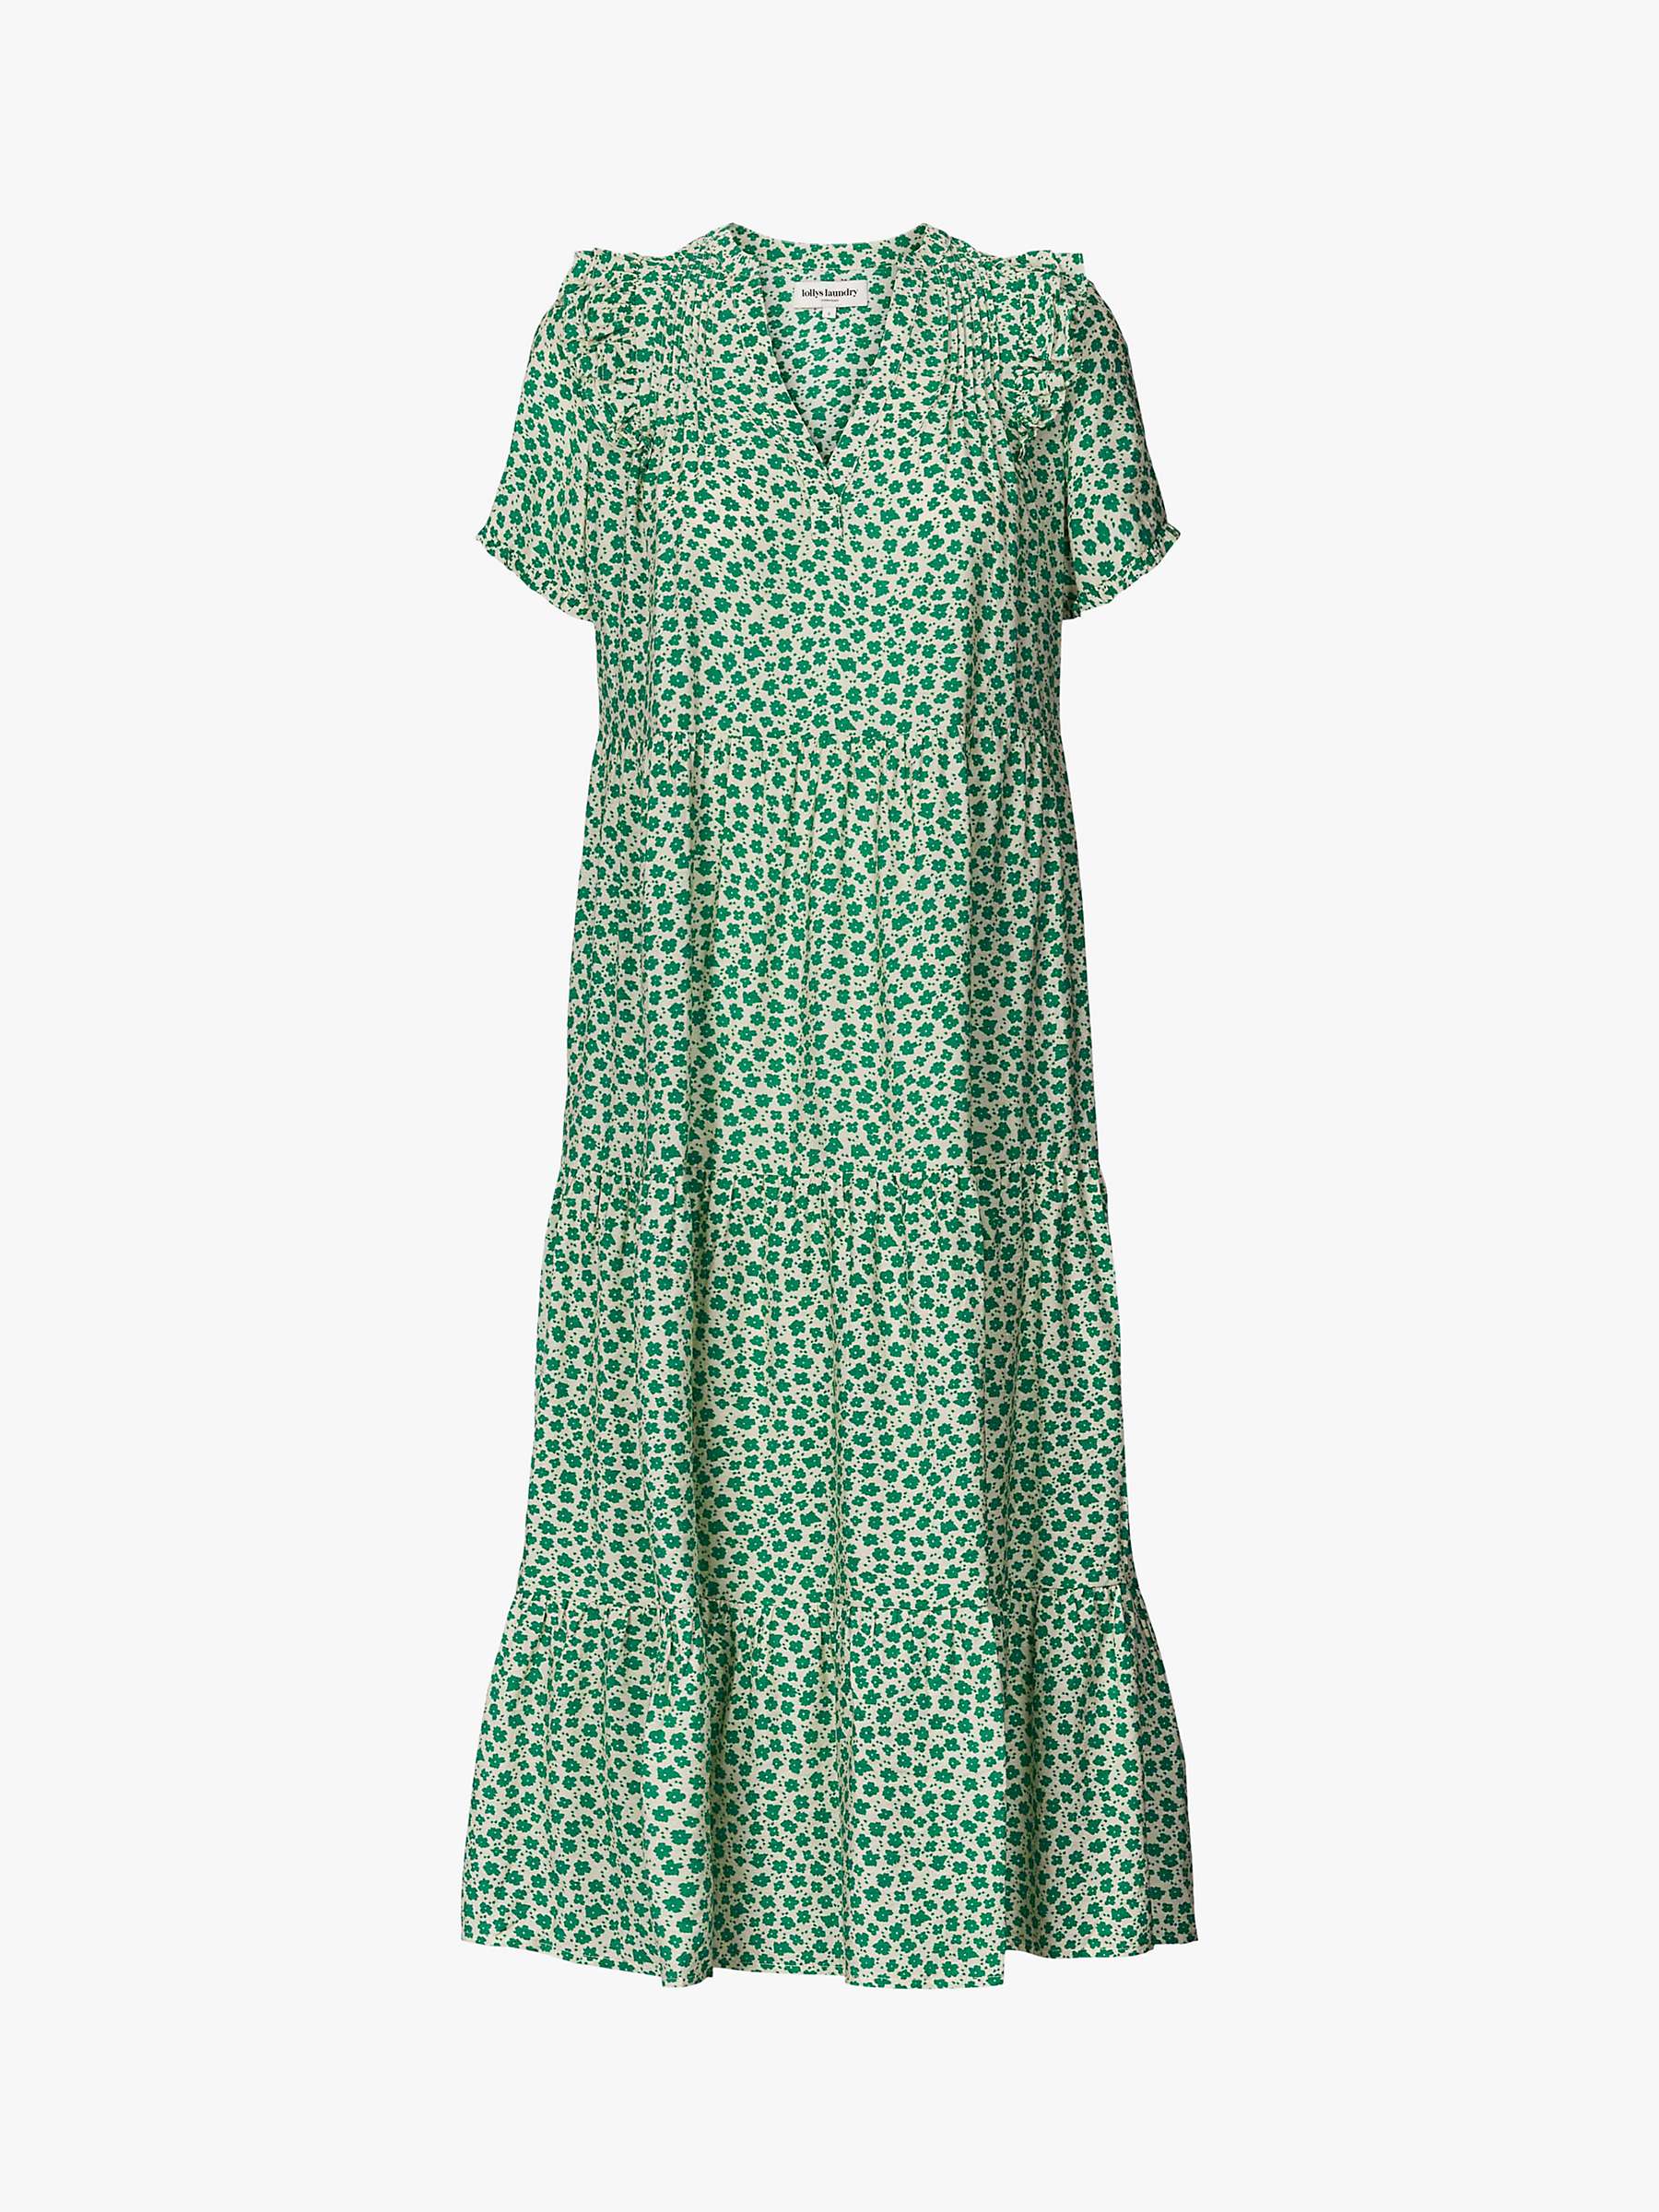 Buy Lollys Laundry Freddy Flower Print Tiered Midi Dress, Green Online at johnlewis.com